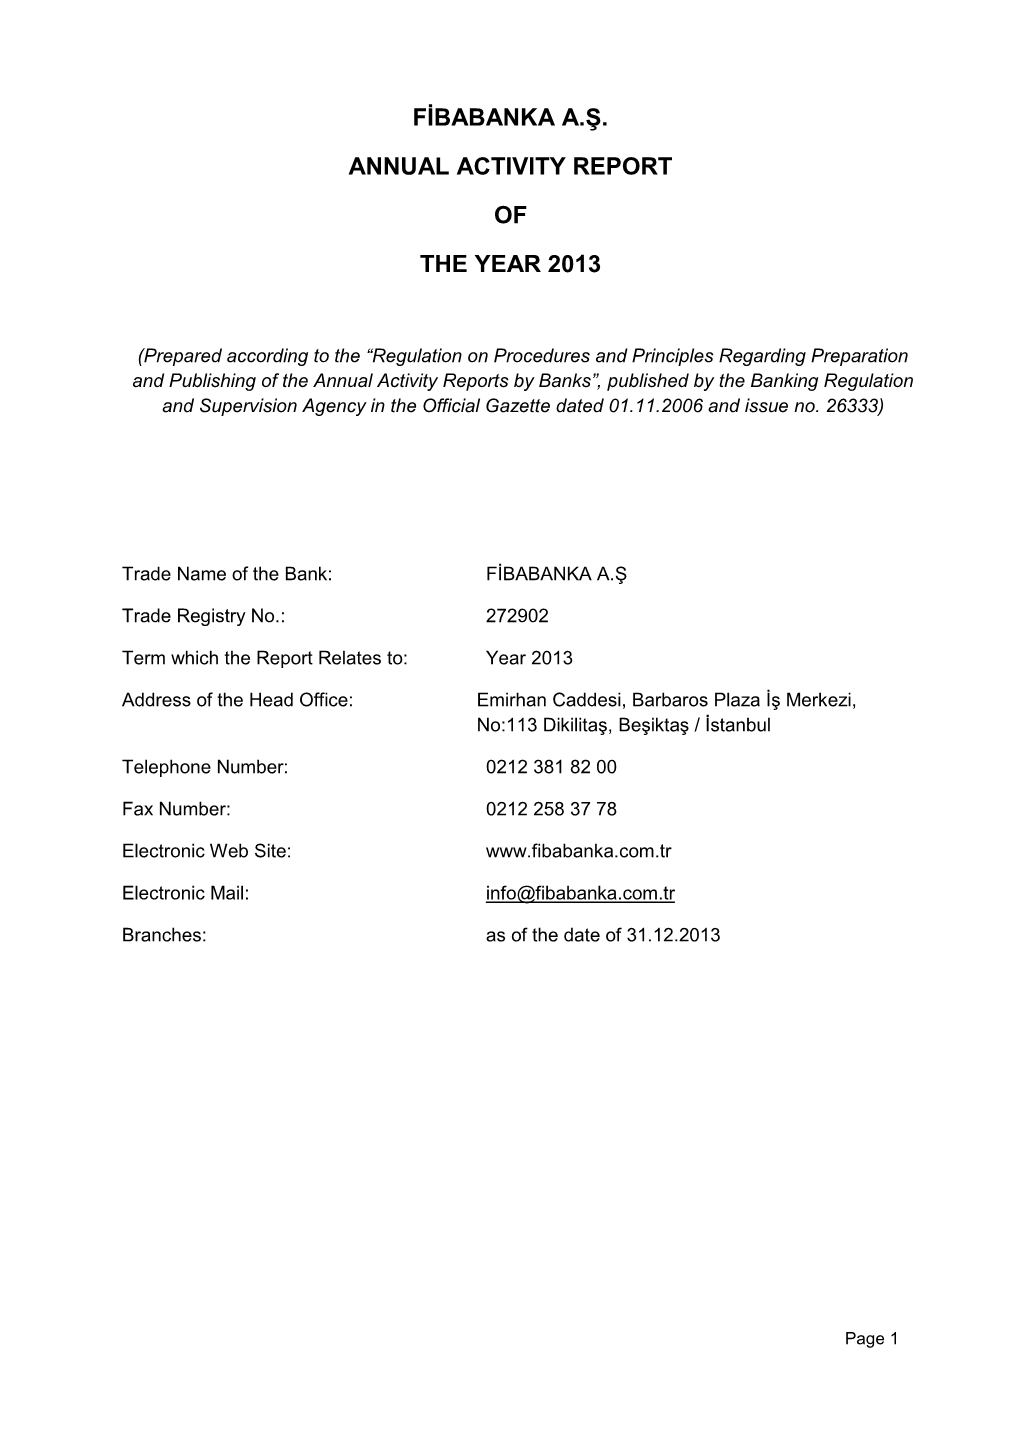 Fi̇babanka A.Ş. Annual Activity Report of the Year 2013